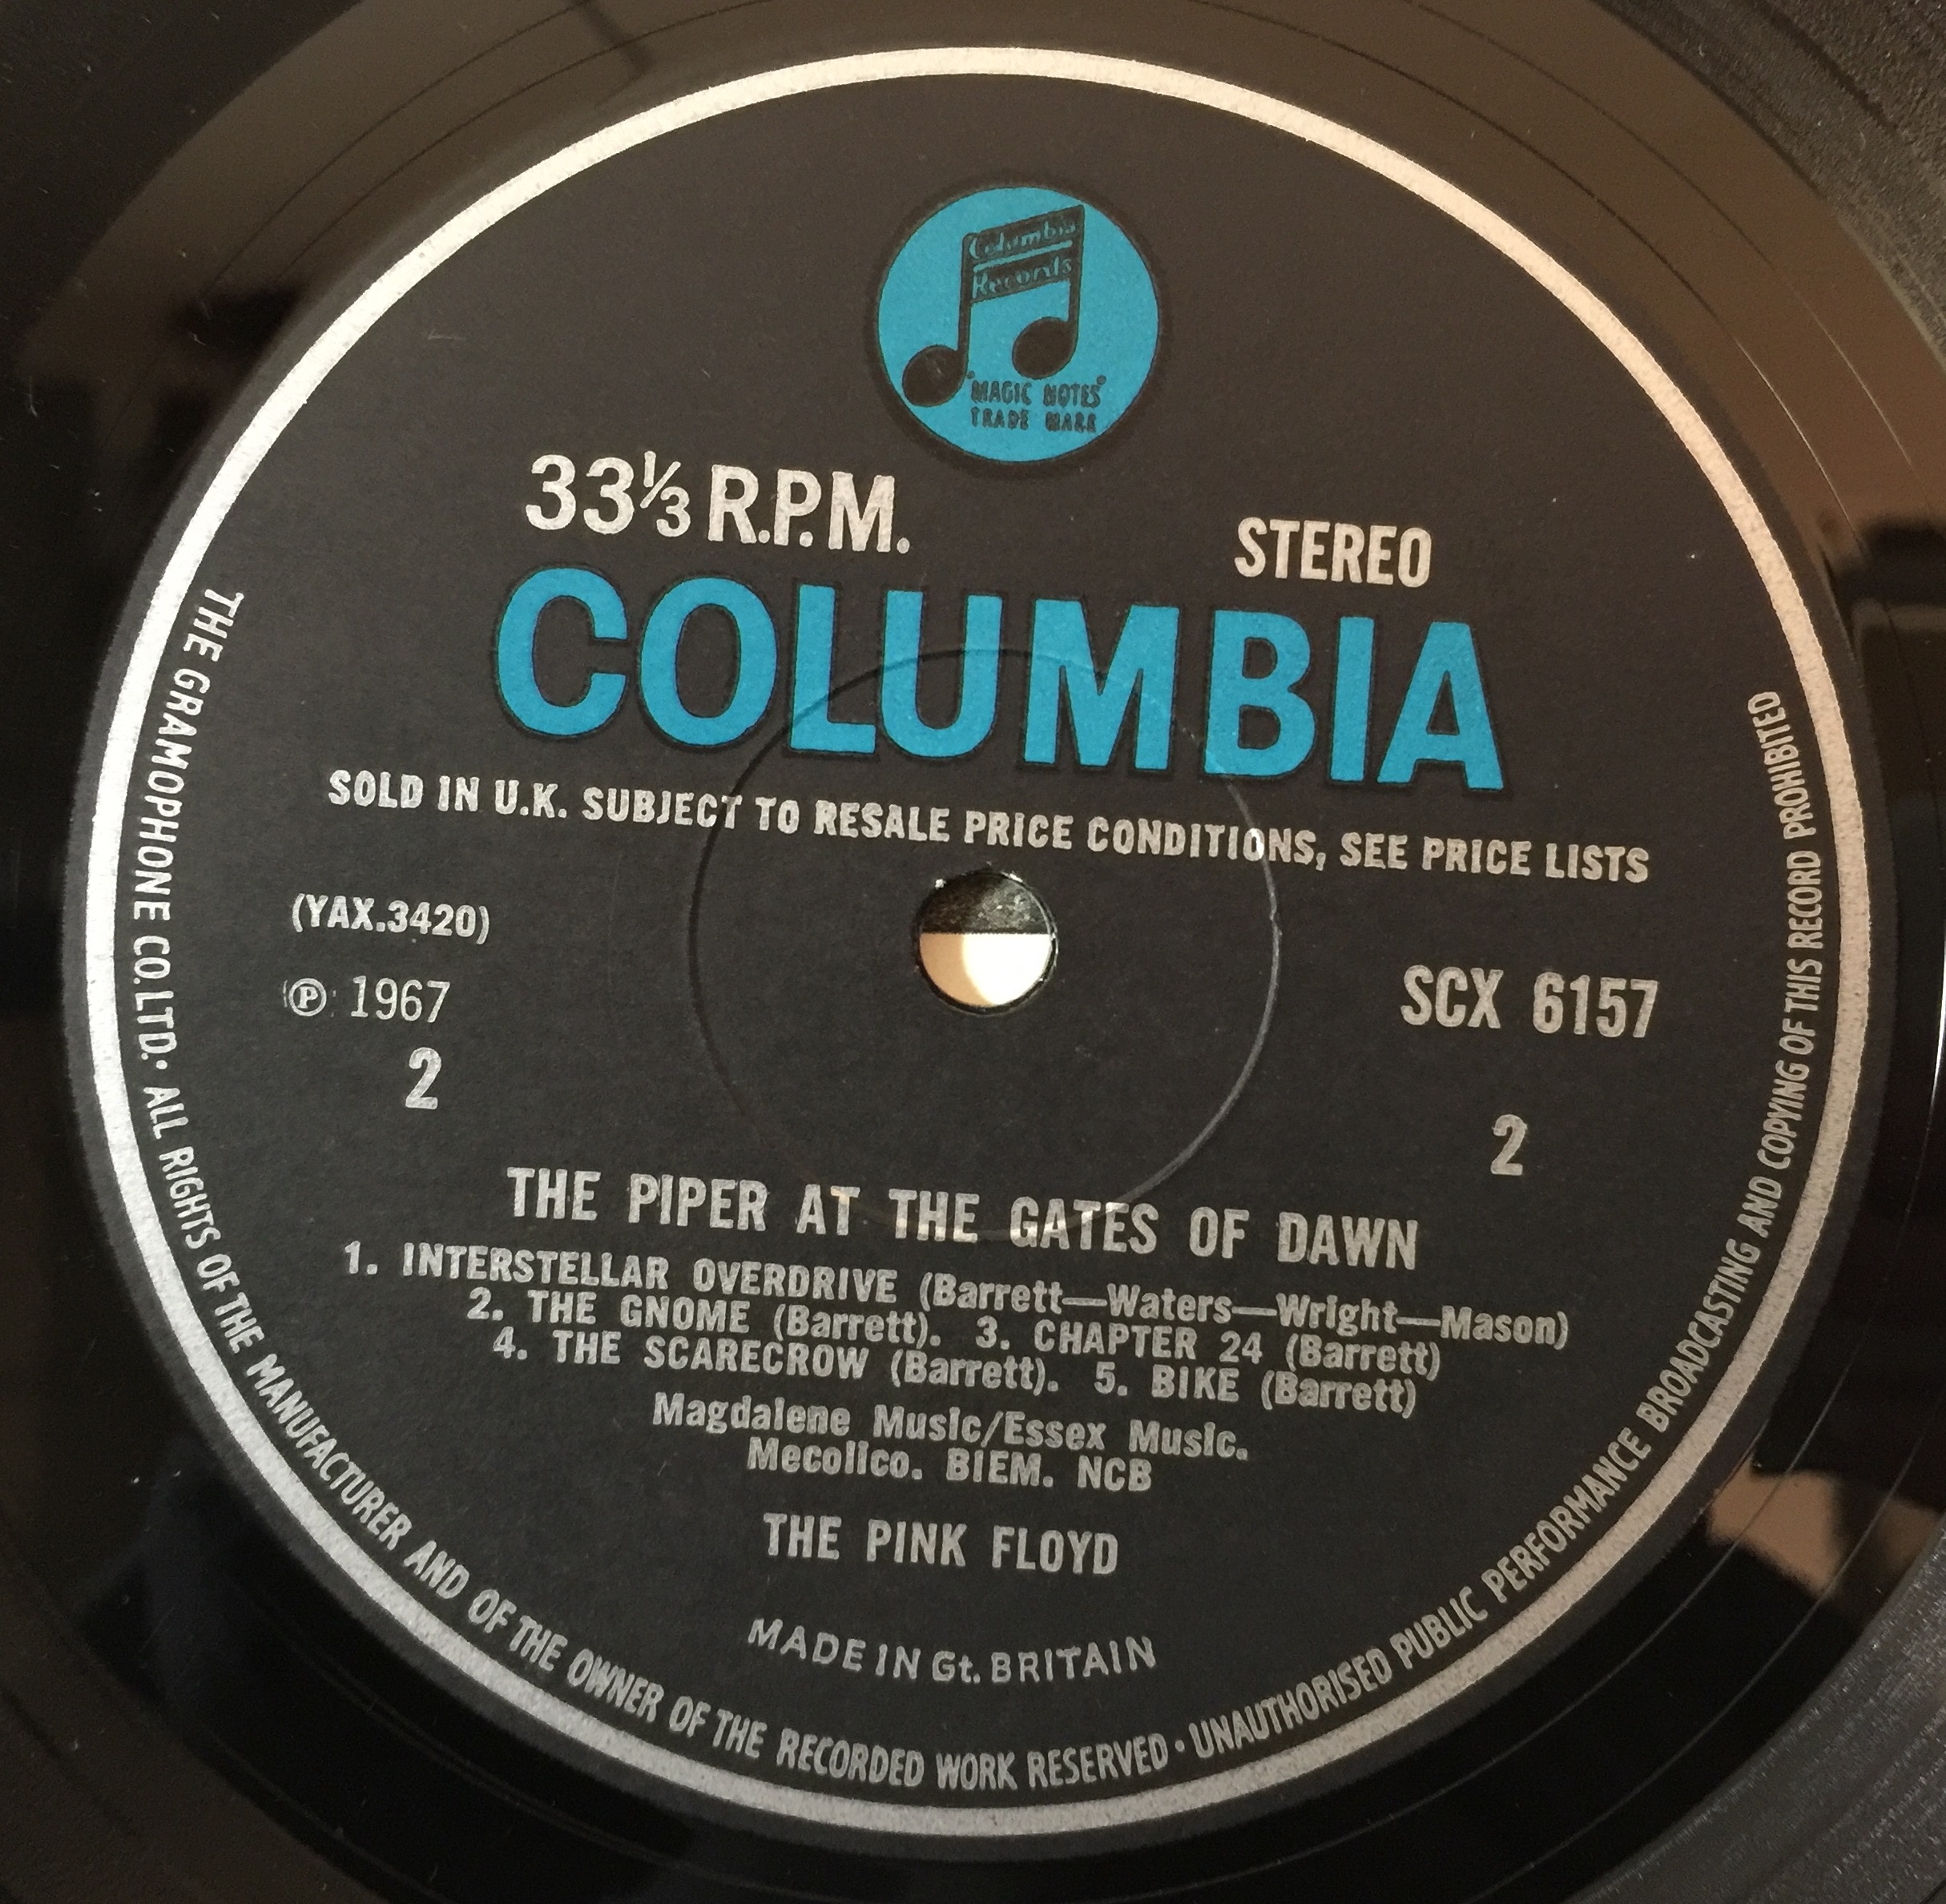 PINK FLOYD - THE PIPER AT THE GATES OF DAWN LP (ORIGINAL UK STEREO PRESSING - COLUMBIA SCX 6157). - Image 4 of 4